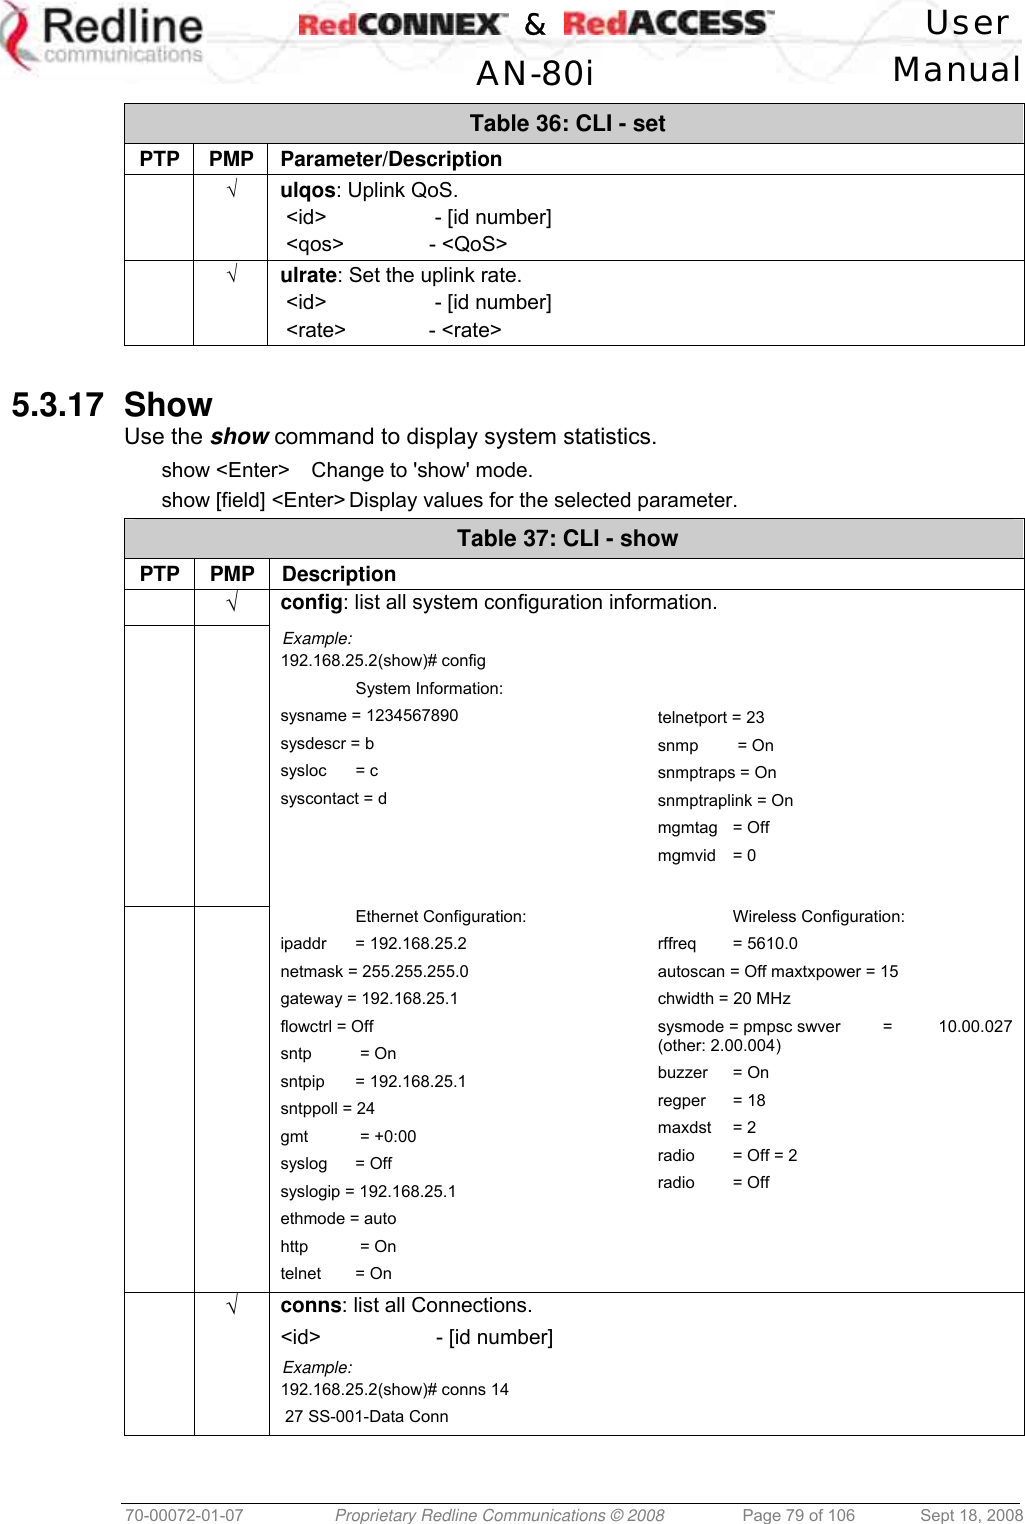    &amp;  User  AN-80i Manual  70-00072-01-07  Proprietary Redline Communications © 2008  Page 79 of 106  Sept 18, 2008 Table 36: CLI - set PTP PMP Parameter/Description  √ ulqos: Uplink QoS.  &lt;id&gt;     - [id number]  &lt;qos&gt;    - &lt;QoS&gt;  √ ulrate: Set the uplink rate.  &lt;id&gt;     - [id number]  &lt;rate&gt;   - &lt;rate&gt;  5.3.17 Show Use the show command to display system statistics. show &lt;Enter&gt;  Change to &apos;show&apos; mode. show [field] &lt;Enter&gt; Display values for the selected parameter. Table 37: CLI - show PTP PMP Description  √ config: list all system configuration information.   Example: 192.168.25.2(show)# config  System Information: sysname = 1234567890 sysdescr = b sysloc = c syscontact = d     telnetport = 23 snmp   = On snmptraps = On snmptraplink = On mgmtag = Off mgmvid = 0     Ethernet Configuration: ipaddr = 192.168.25.2 netmask = 255.255.255.0 gateway = 192.168.25.1 flowctrl = Off sntp   = On sntpip = 192.168.25.1 sntppoll = 24 gmt   = +0:00 syslog  = Off  syslogip = 192.168.25.1 ethmode = auto http   = On telnet = On  Wireless Configuration: rffreq = 5610.0 autoscan = Off maxtxpower = 15 chwidth = 20 MHz sysmode = pmpsc swver  =  10.00.027 (other: 2.00.004) buzzer = On regper = 18 maxdst = 2 radio  = Off = 2 radio = Off  √ conns: list all Connections. &lt;id&gt;     - [id number] Example: 192.168.25.2(show)# conns 14  27 SS-001-Data Conn 